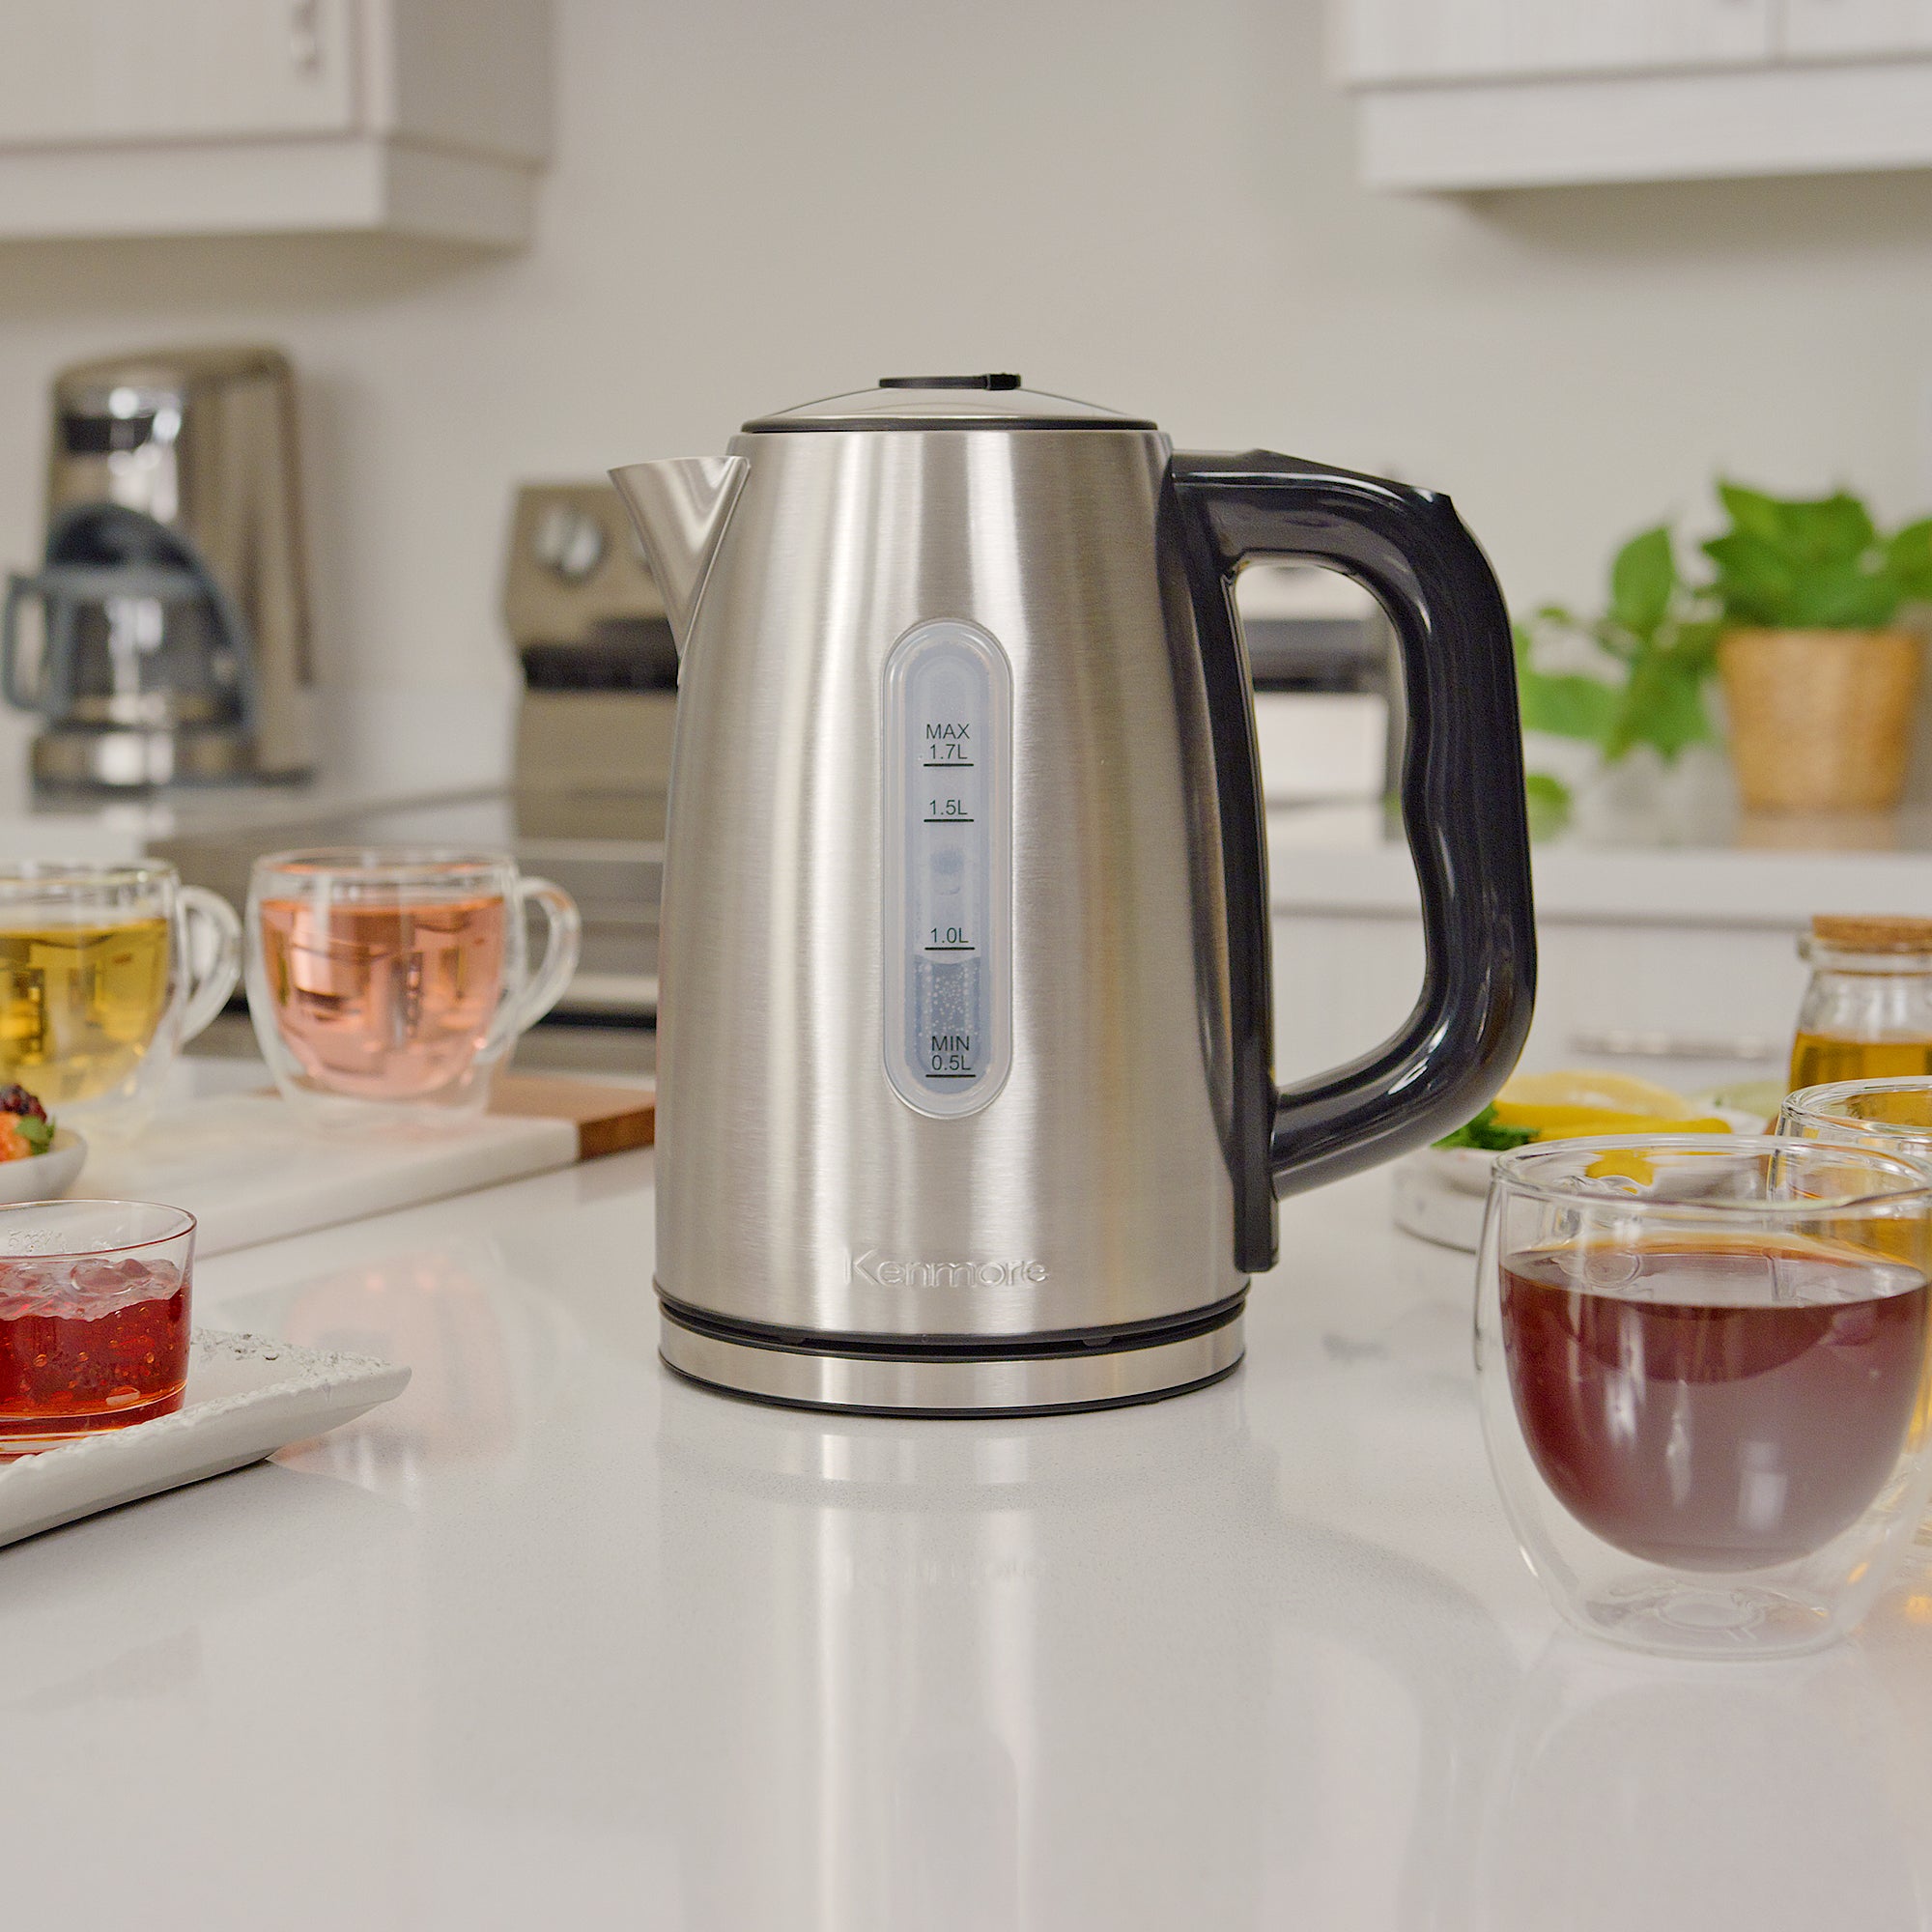 Kenmore stainless steel digital teakettle on a white marbled countertop surrounded by glass mugs of different types of tea